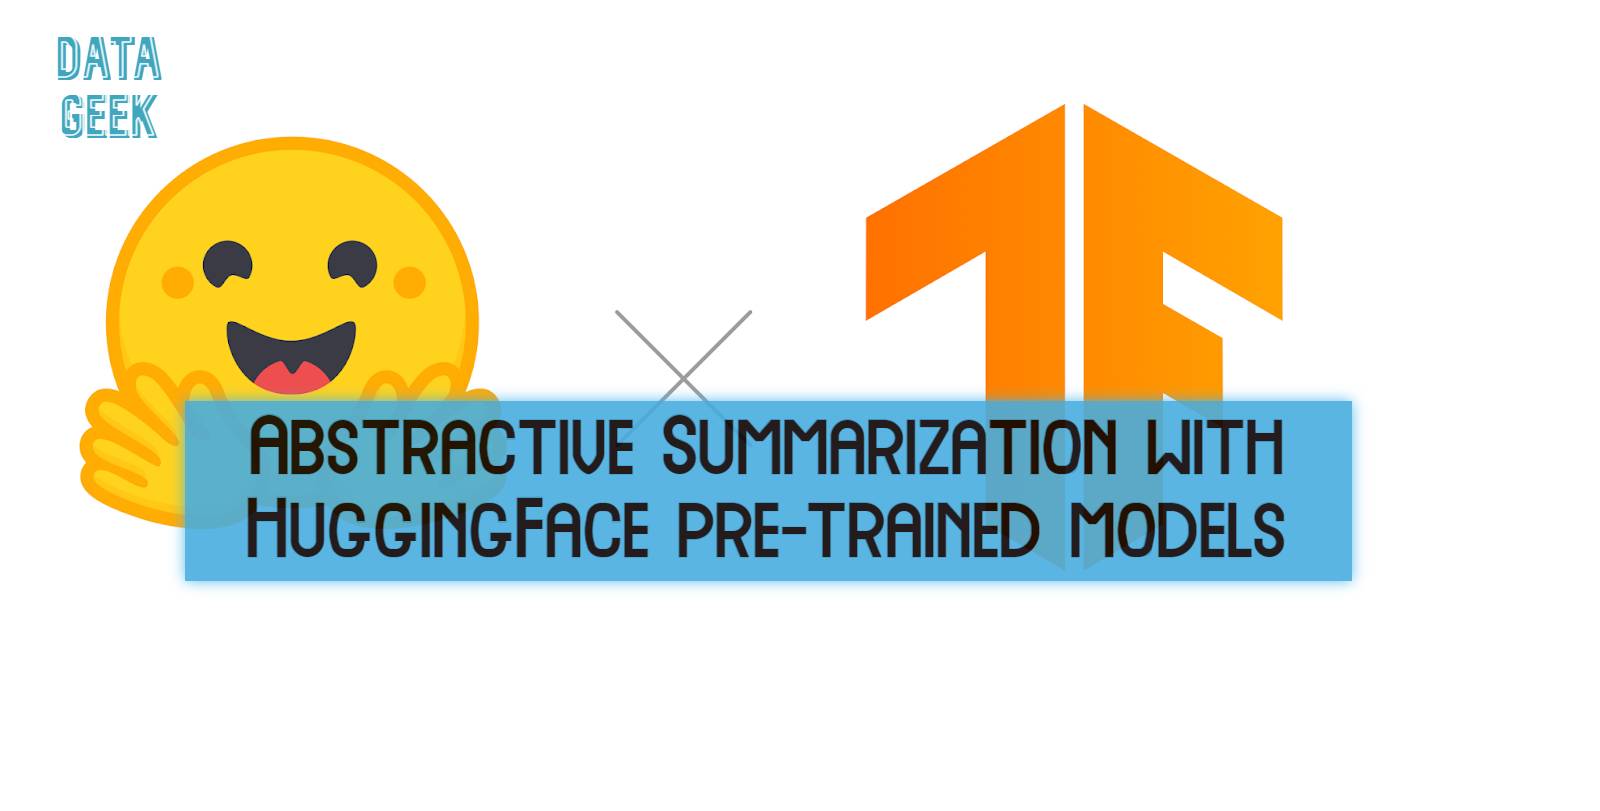 Abstractive Summarization with HuggingFace pre-trained models